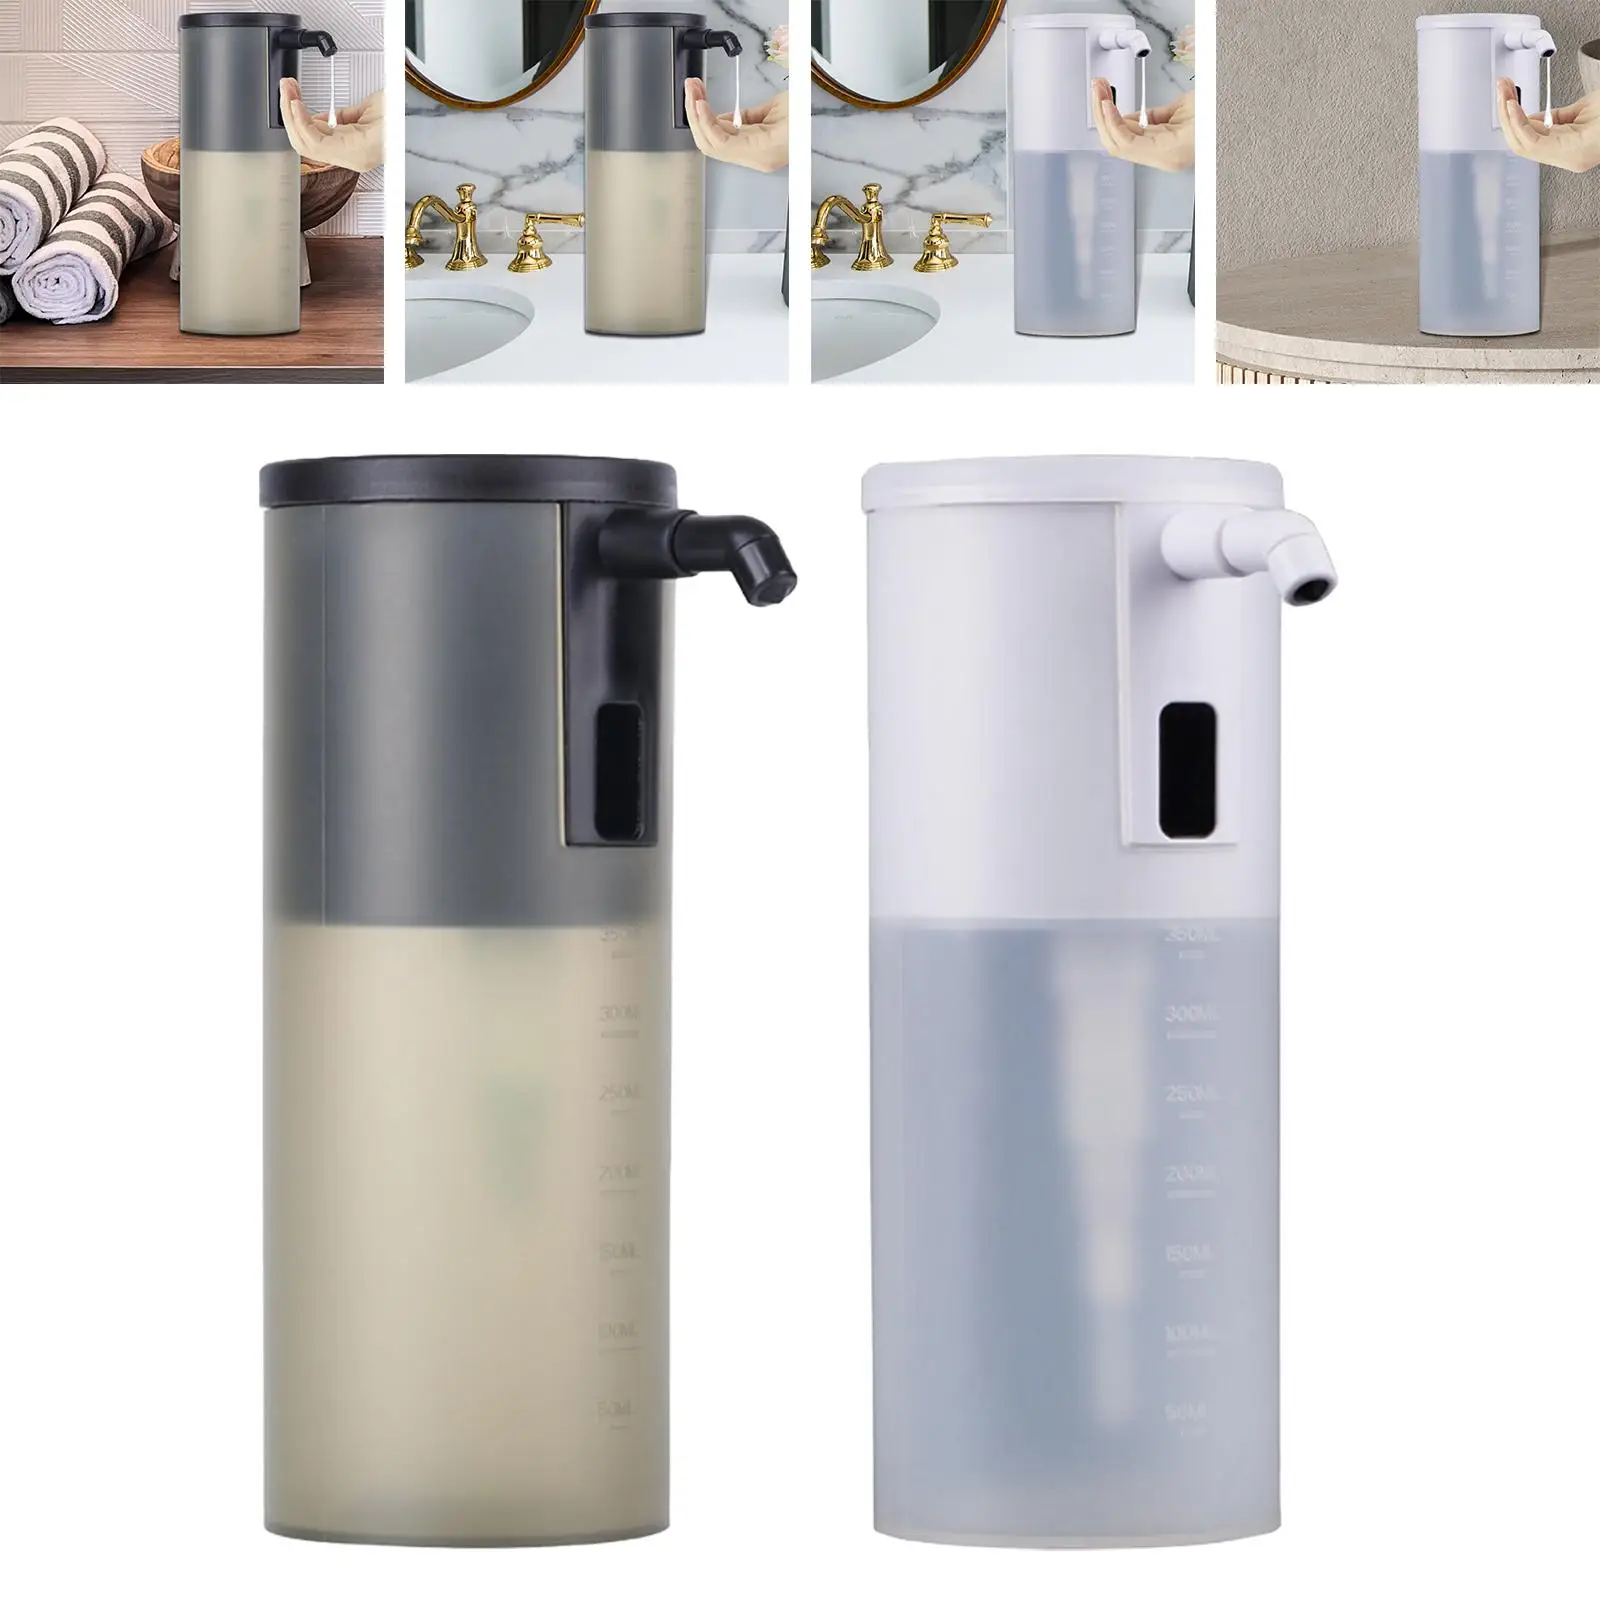 Touchless Soap Dispensers Waterproof Auto Liquid Soap Dispenser Dish Soap Dispenser for Kitchen Offices Commercial home